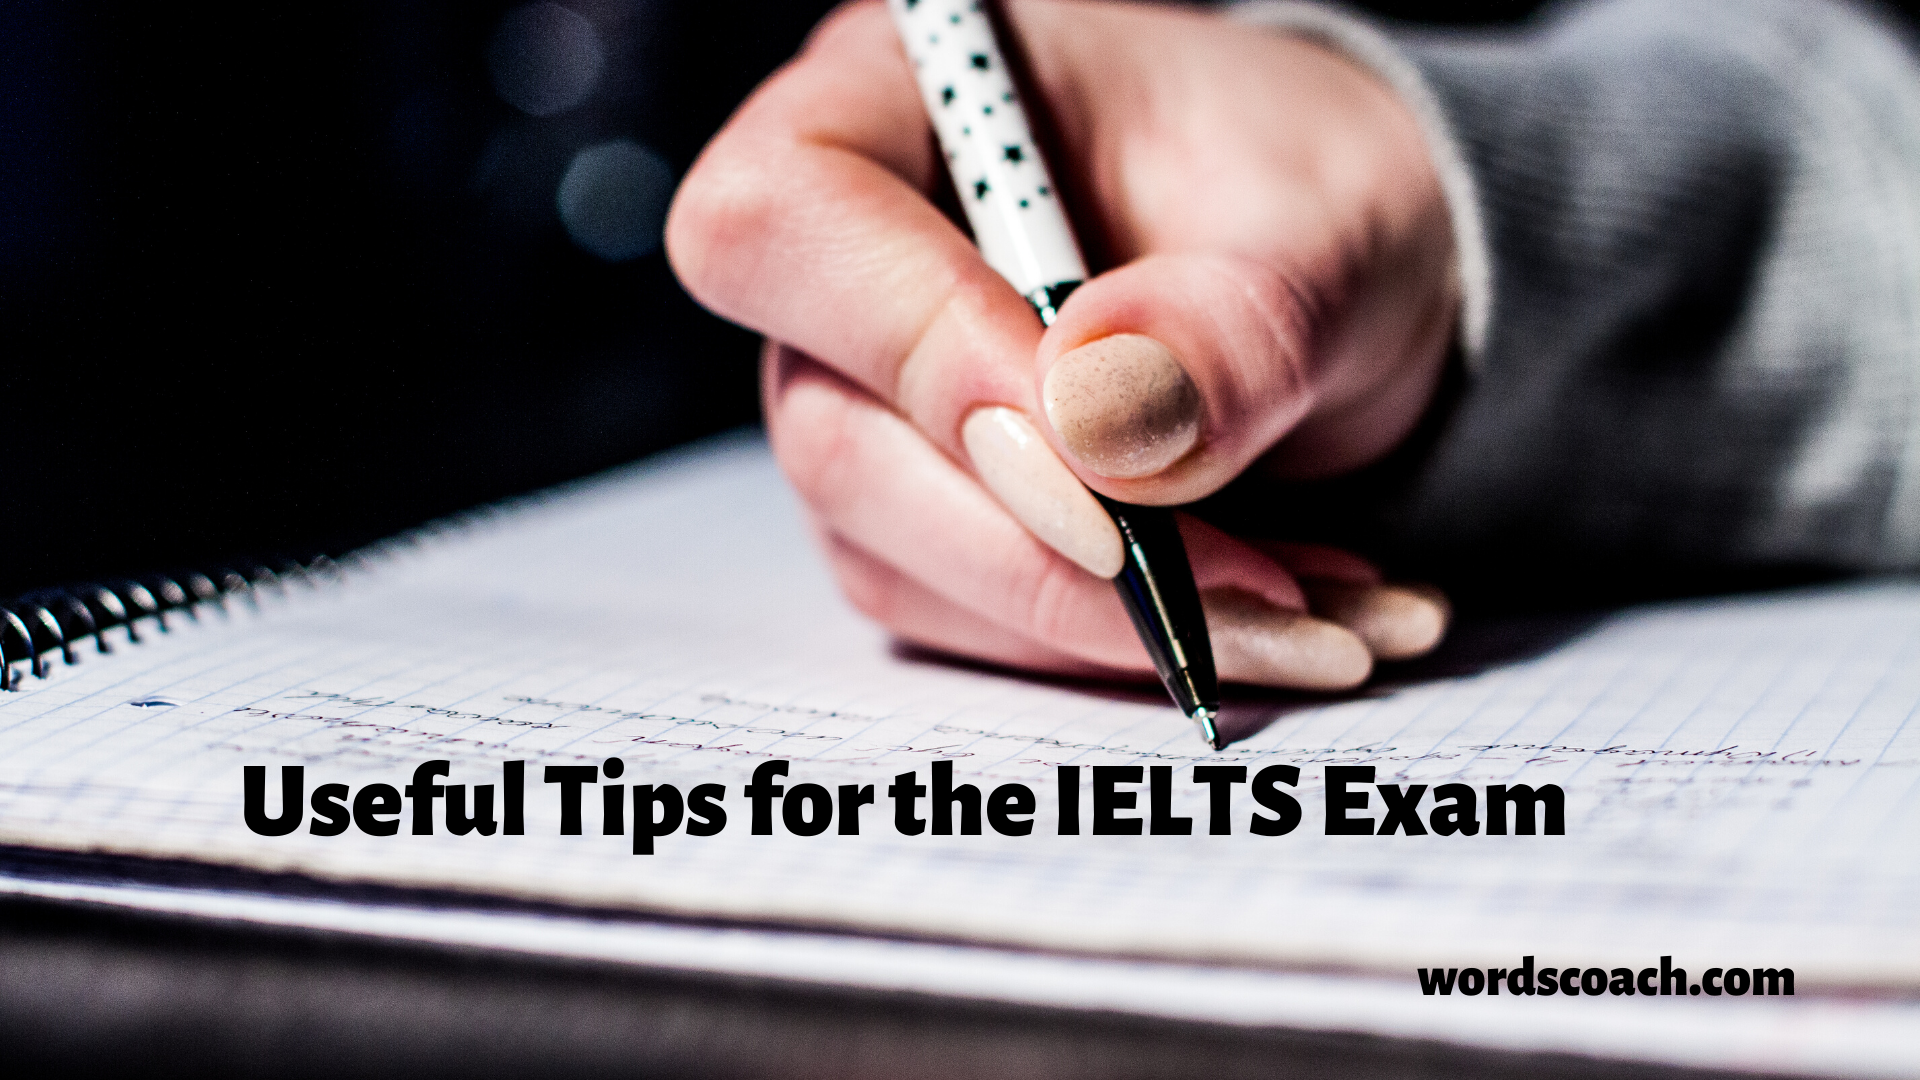 IELTS WRITING SECTION: TIPS FOR IELTS 2021